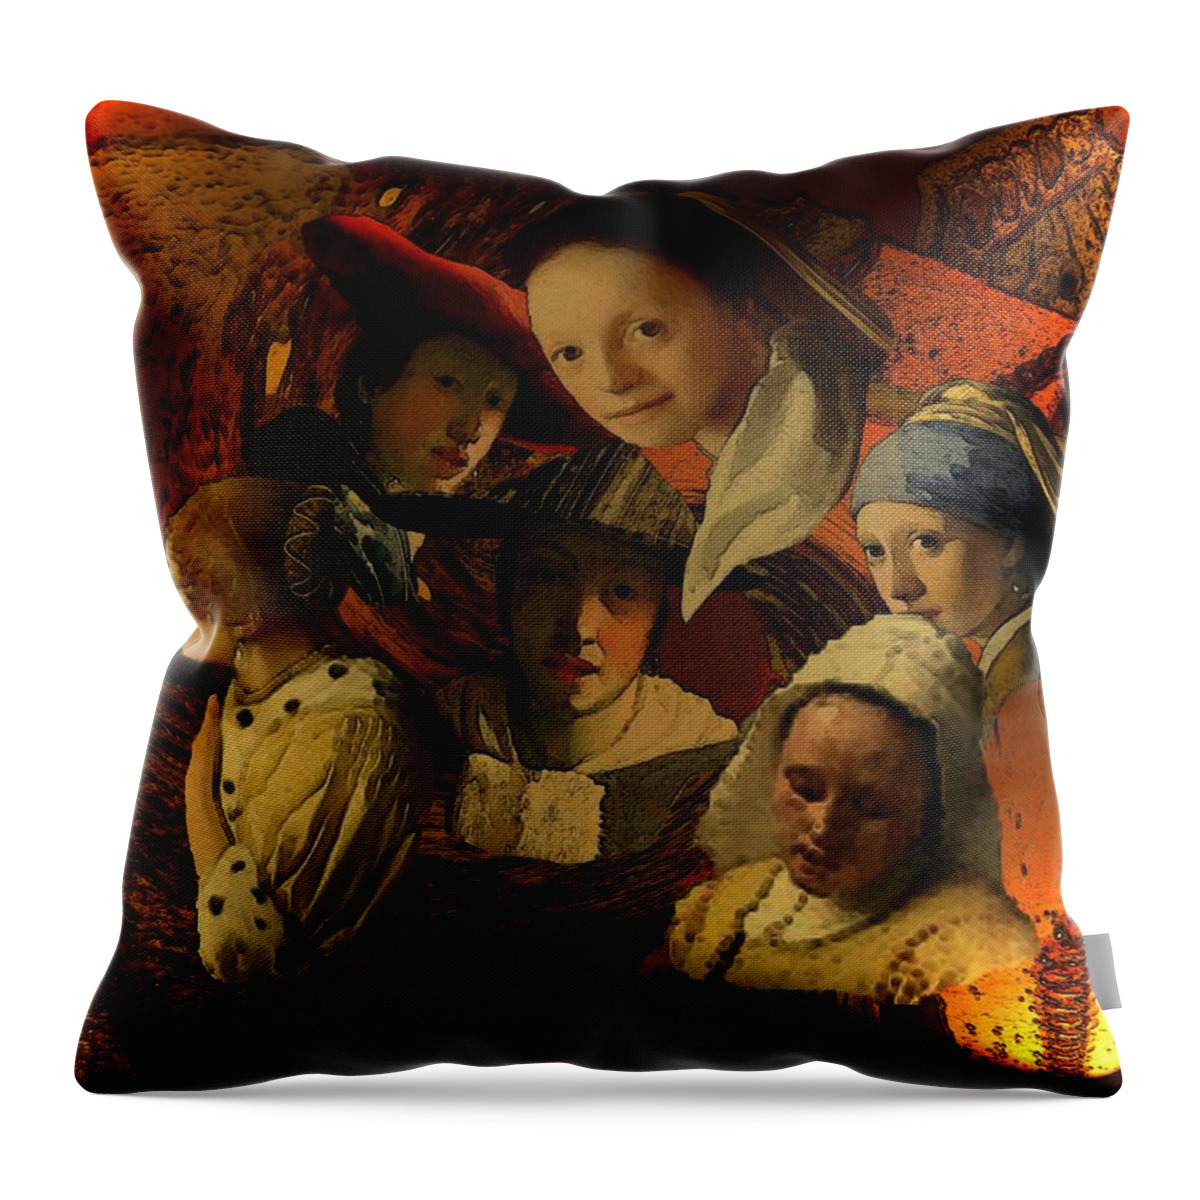 17th-century Throw Pillow featuring the digital art 17th Century Maidens by Tristan Armstrong